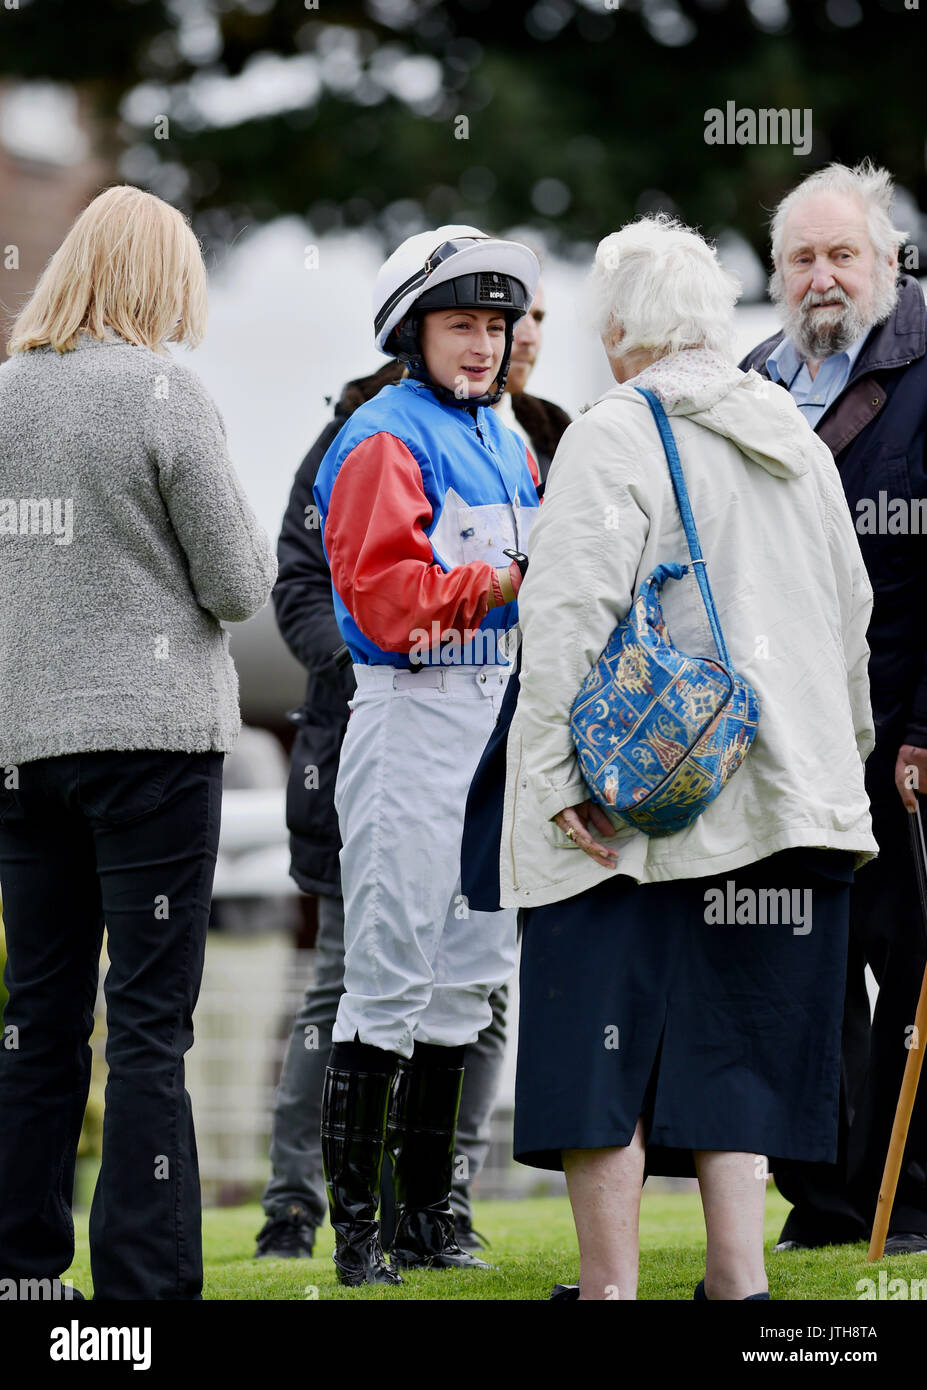 Brighton, UK. 9th Aug, 2017. Jockey Nicola Currie at the Marstons Race Day in the Maronthonbet Festival of Racing at Brighton Racecourse Credit: Simon Dack/Alamy Live News Stock Photo